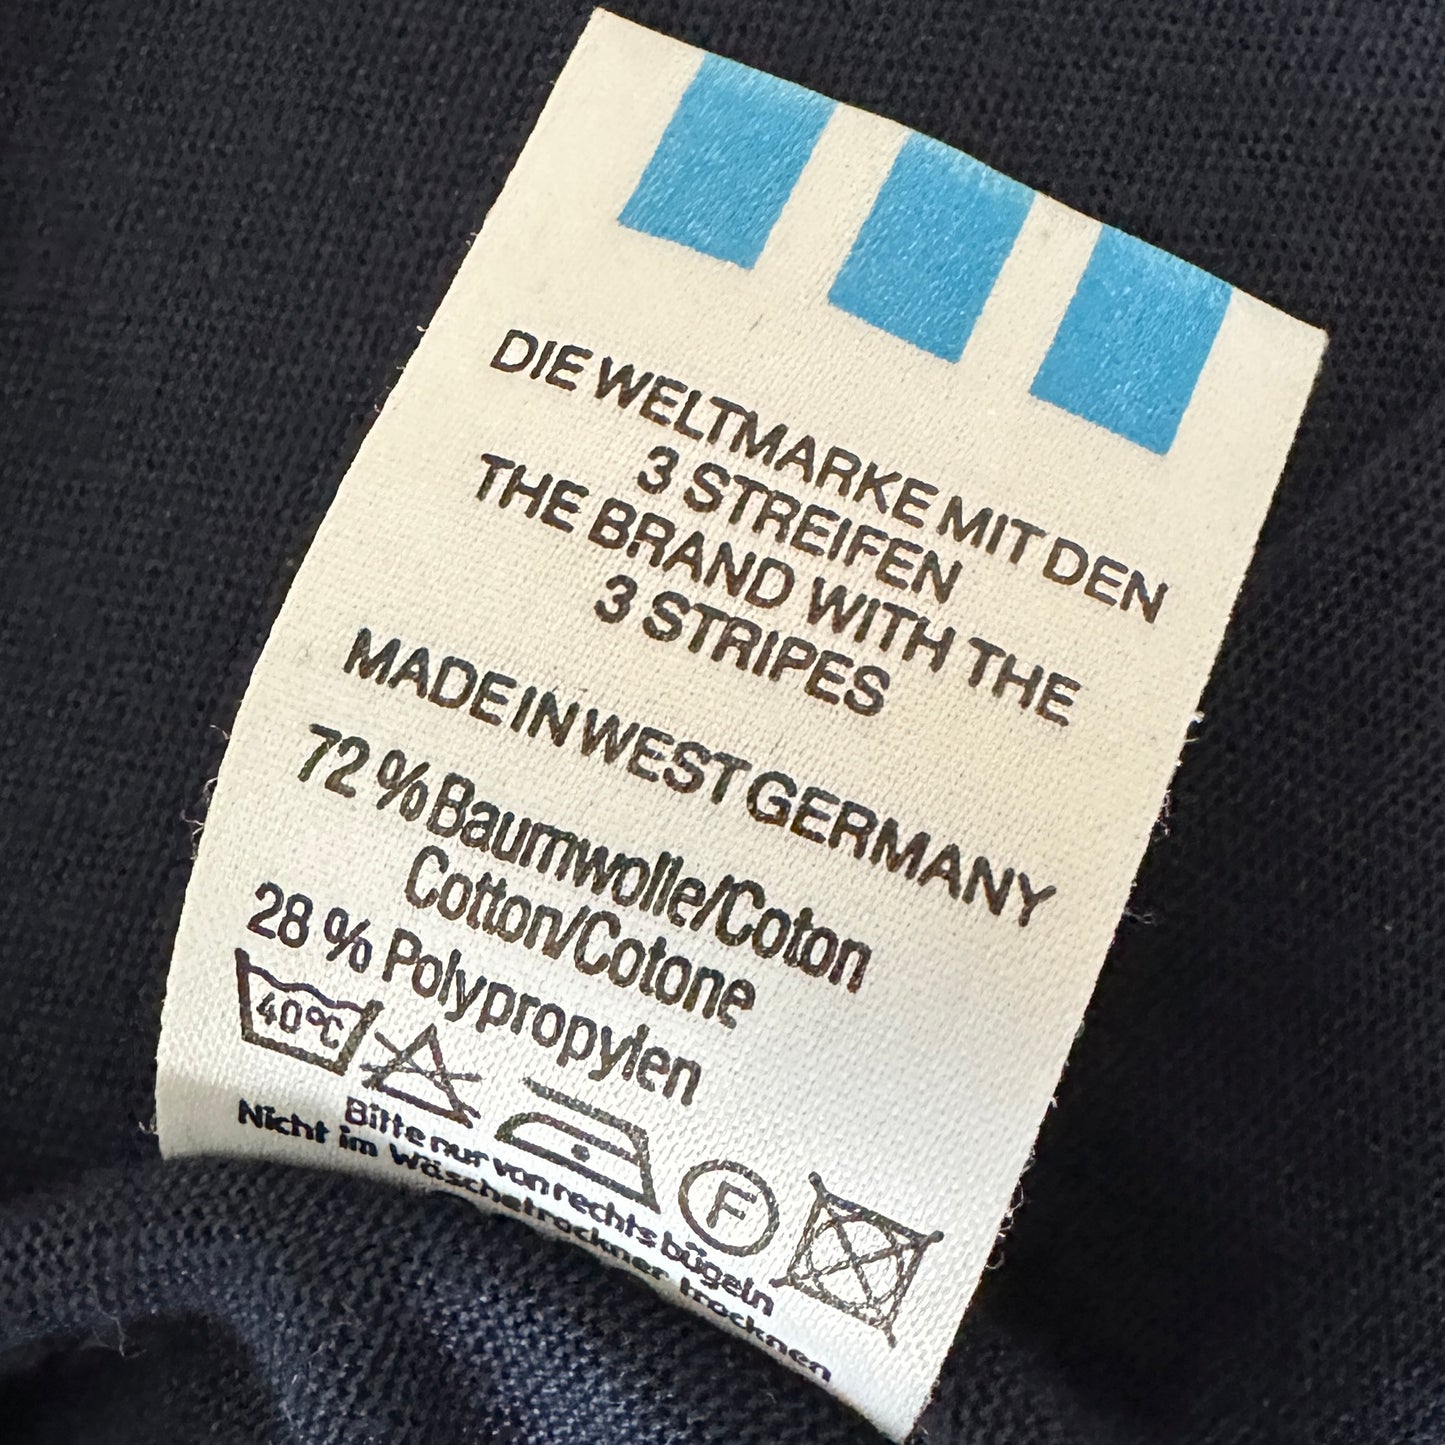 Adidas Vintage 80s Tennis Polo Shirt - 50 / L - Made in West Germany